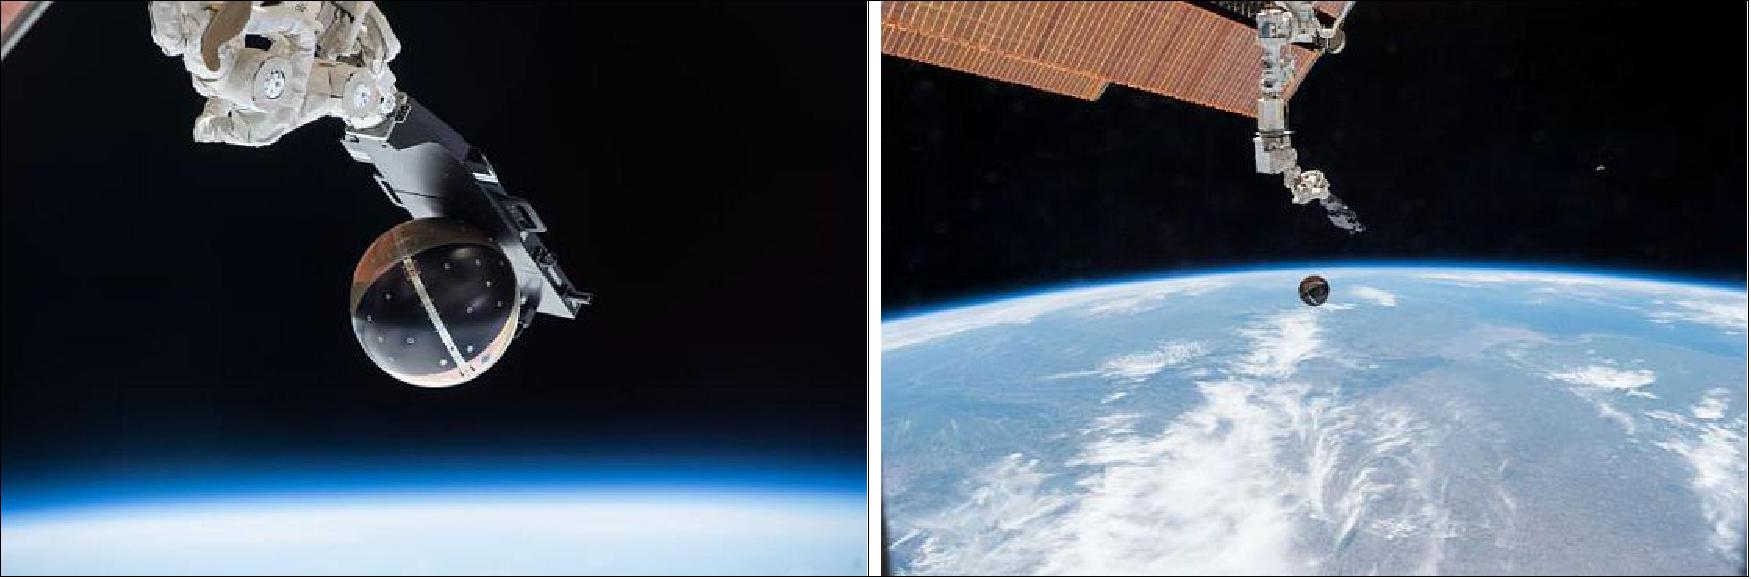 Figure 35: Left: SpinSat deployment from Cyclops; right: SpinSat photo shortly after deployment (image credit: NASA)